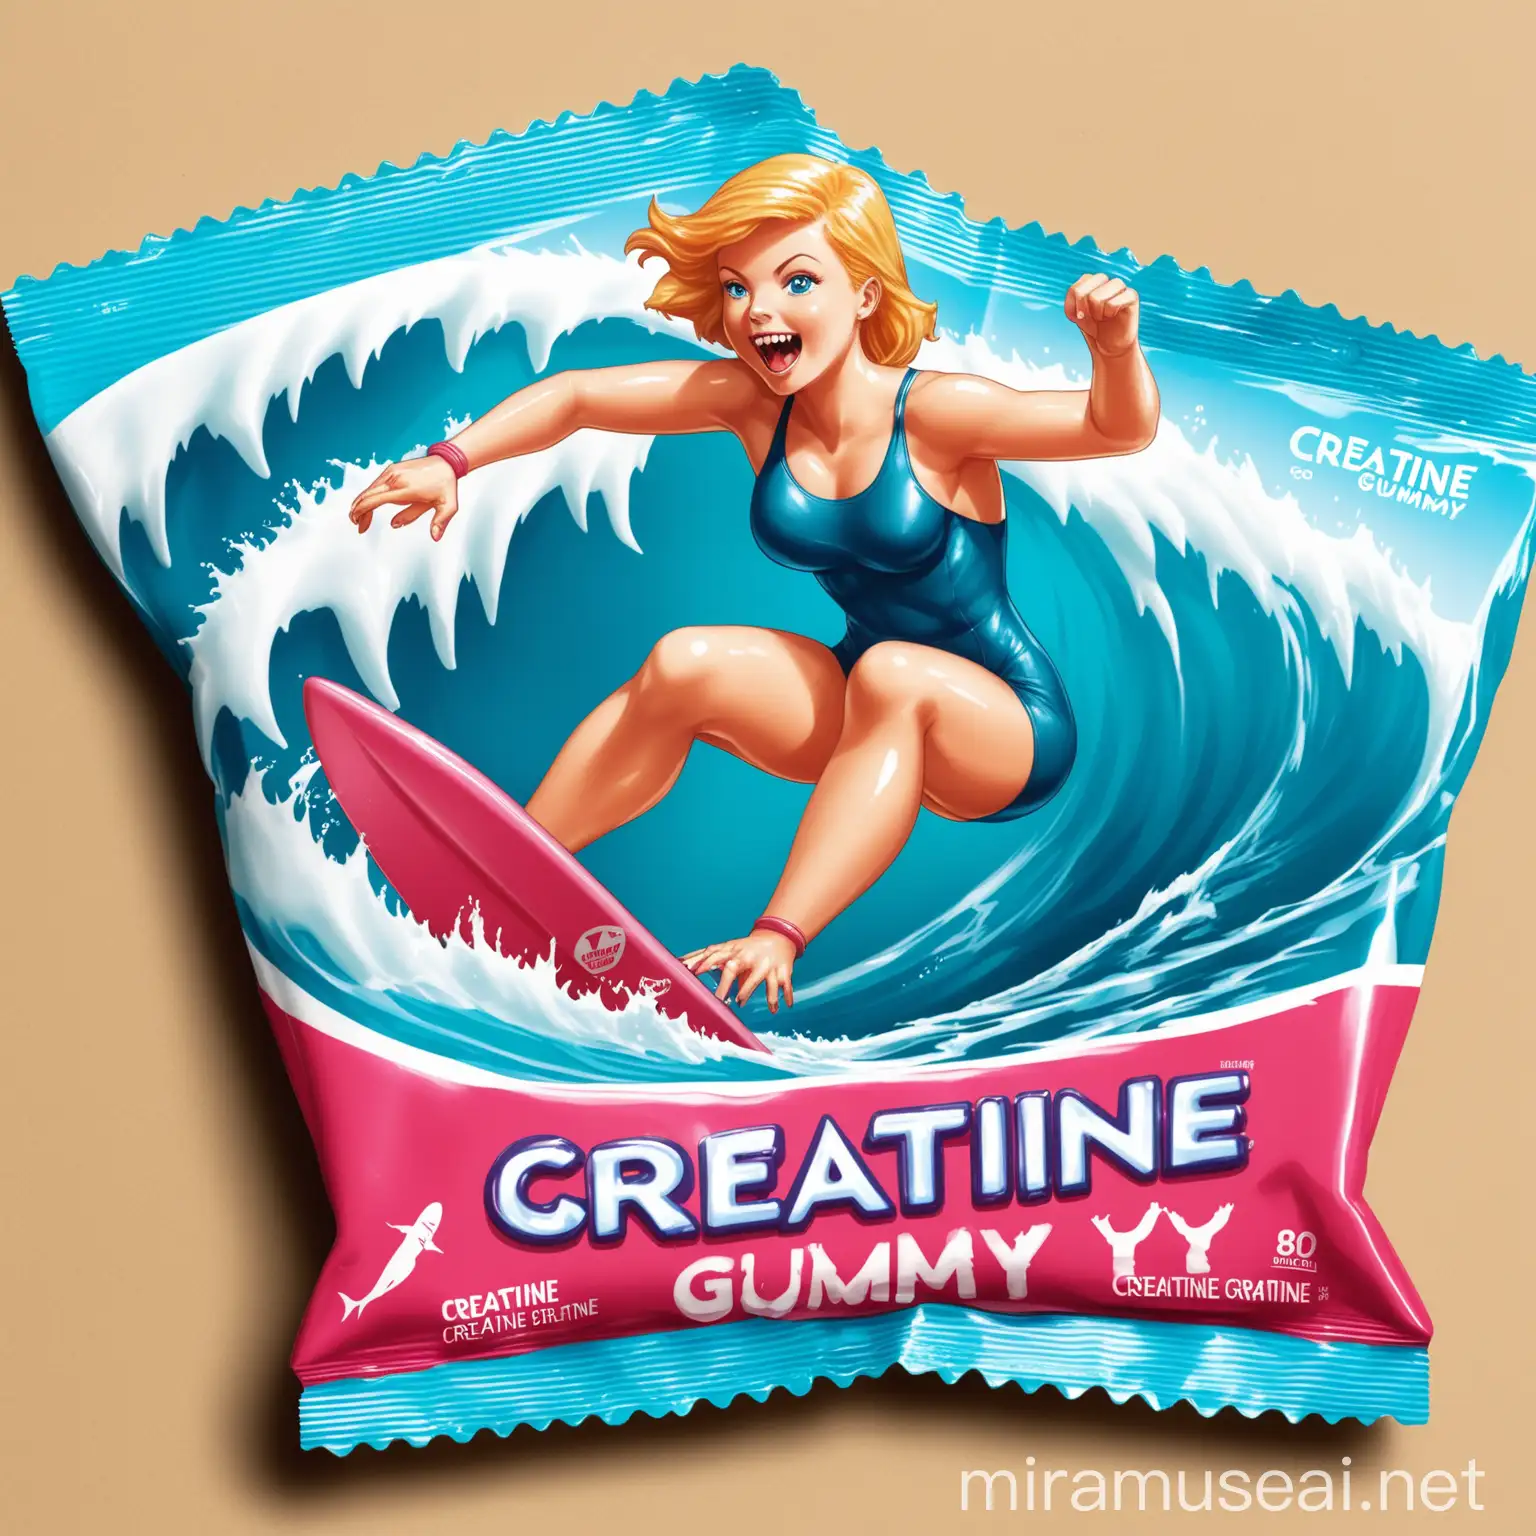 Woman Surfing on a Shark Creative Packaging for Creatine Gummy